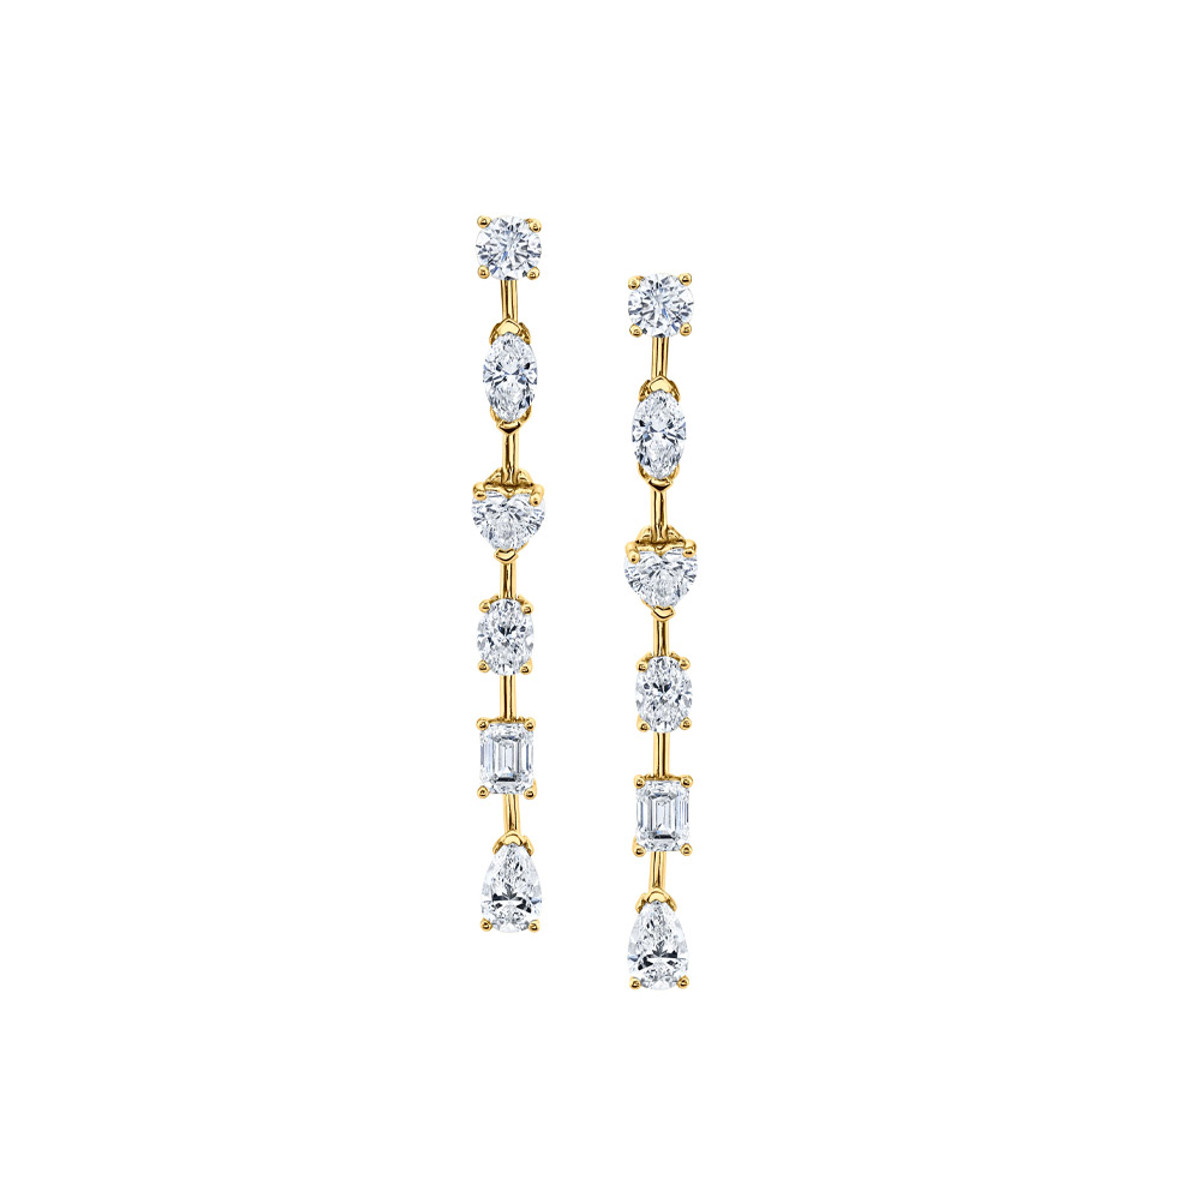 Hyde Park Collection 18K Yellow Gold Diamond Earrings-55847